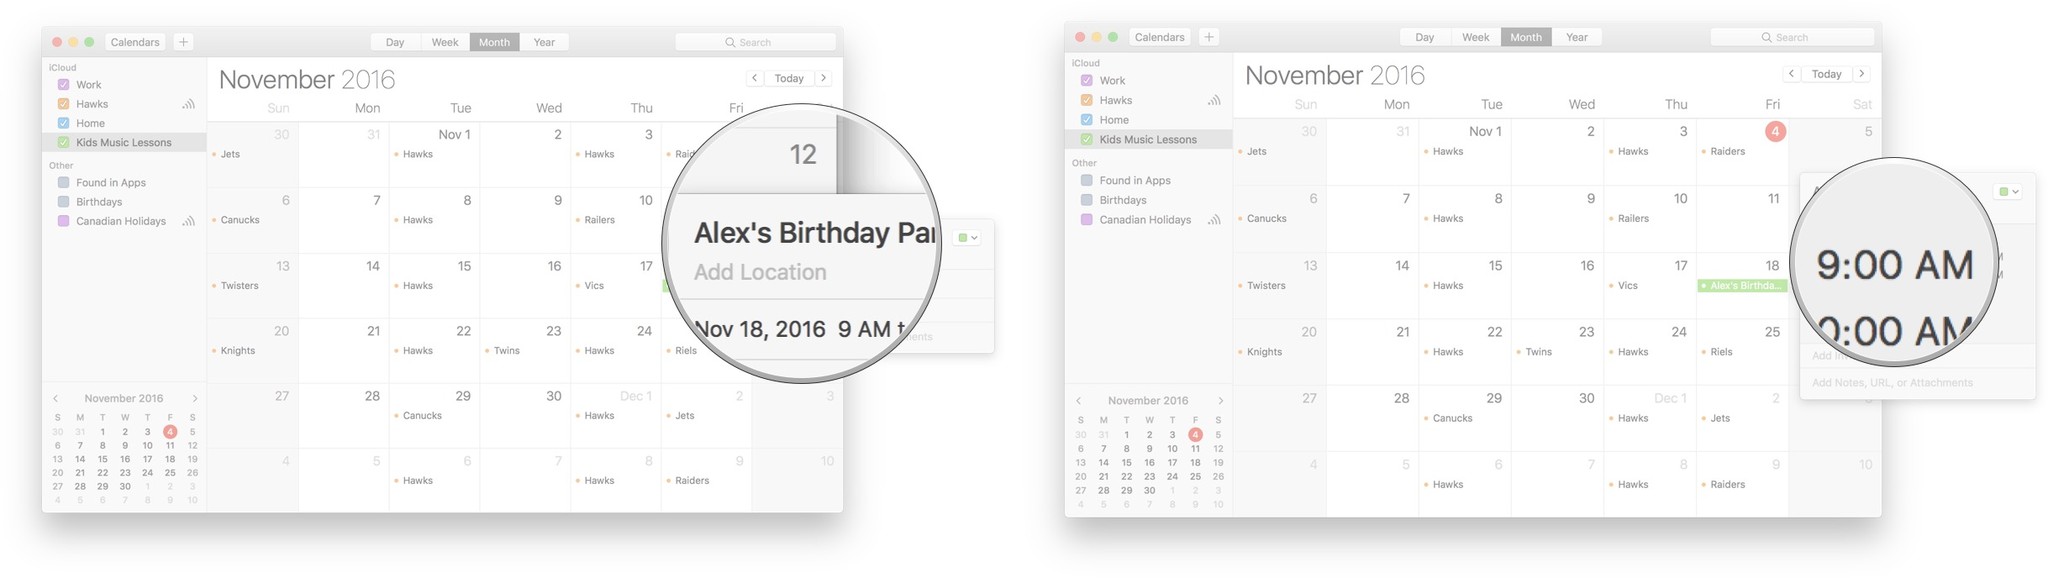 how to change event colors on mac calendar